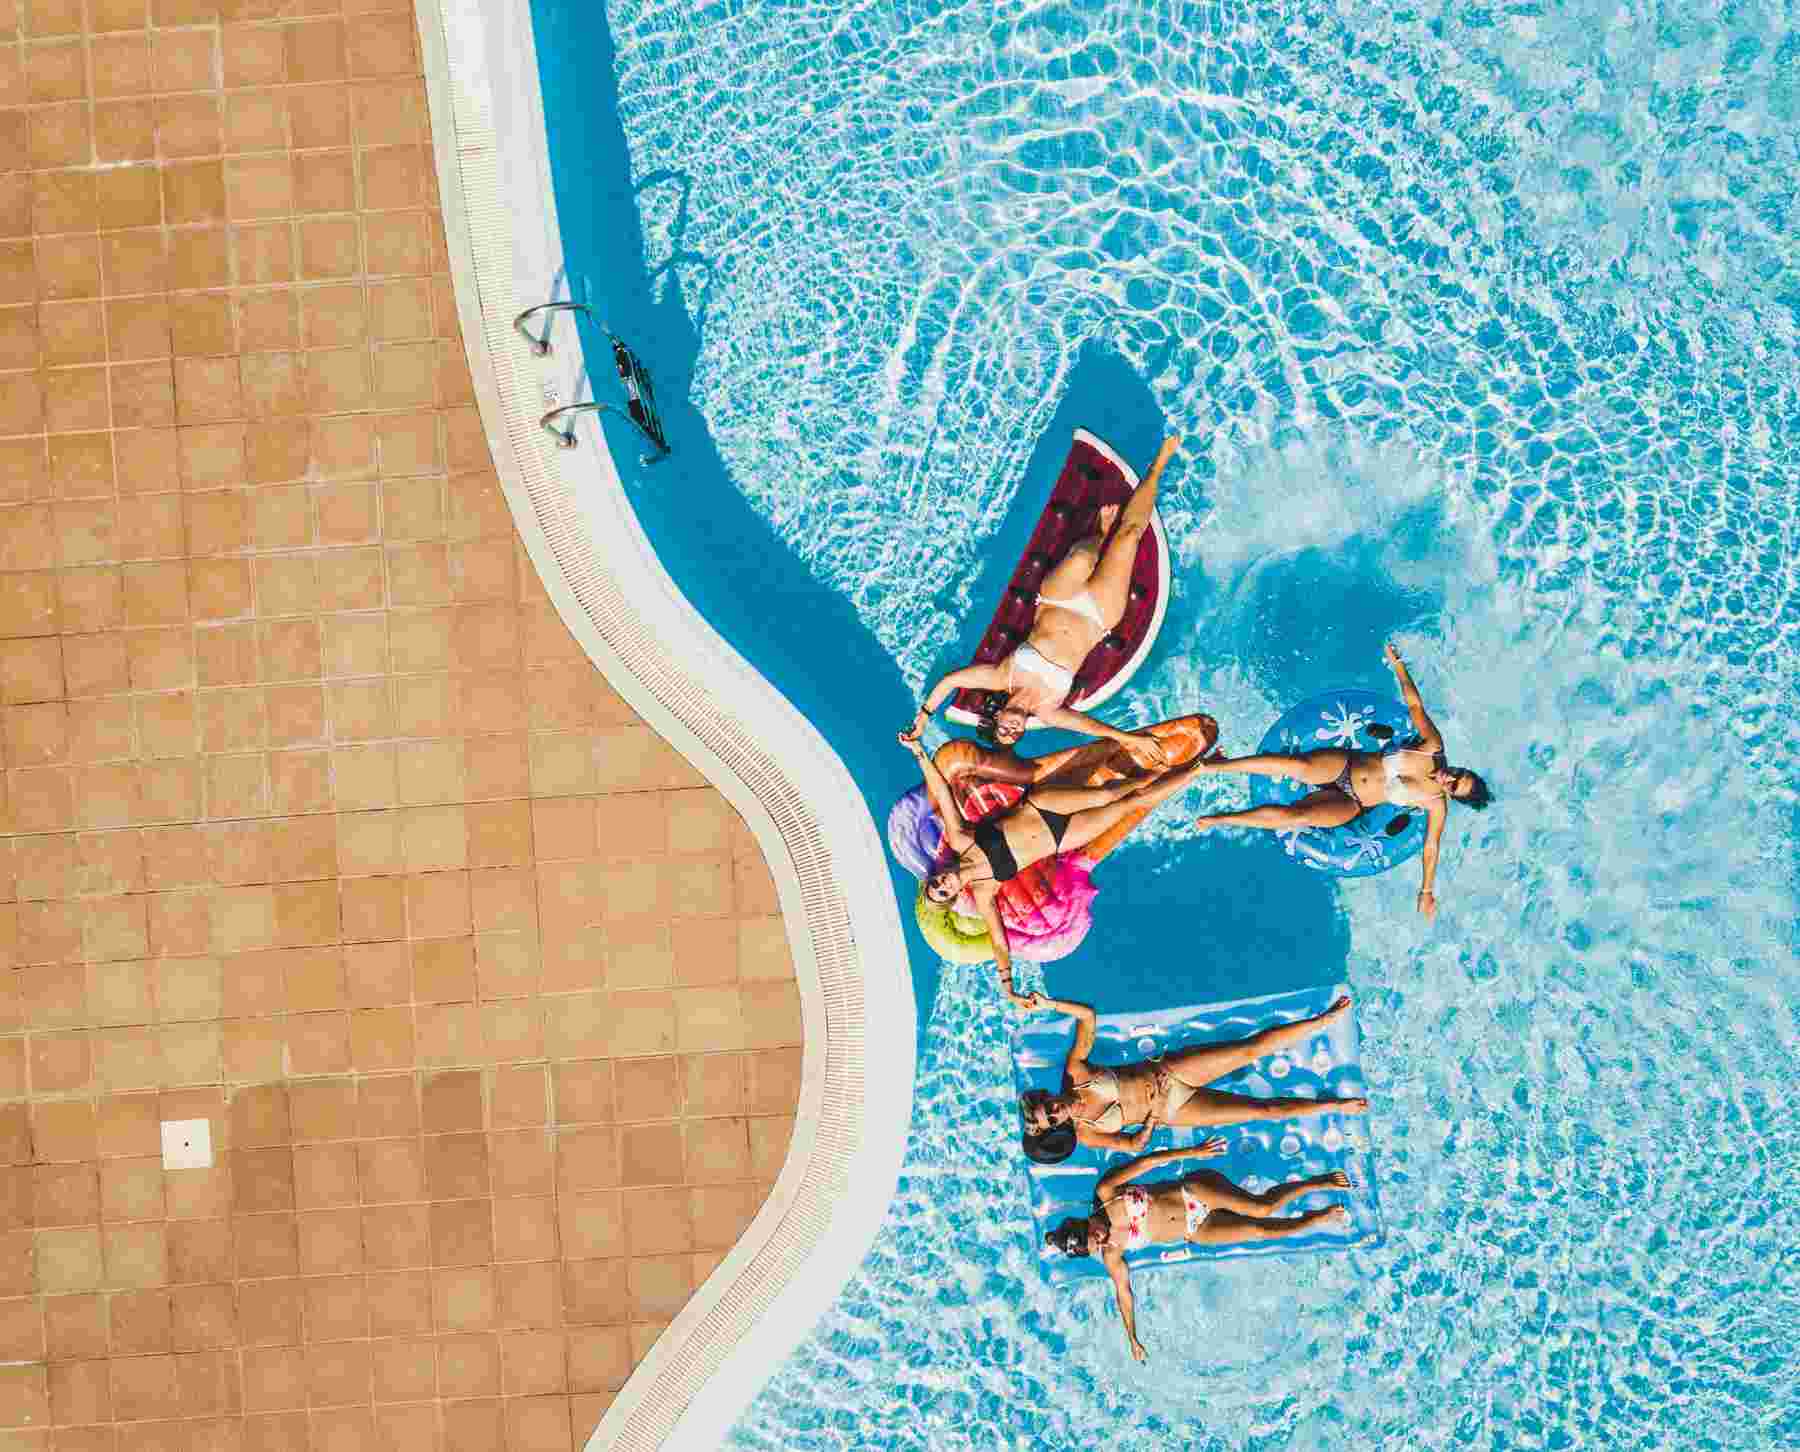 People relaxing on flot in renovated pool